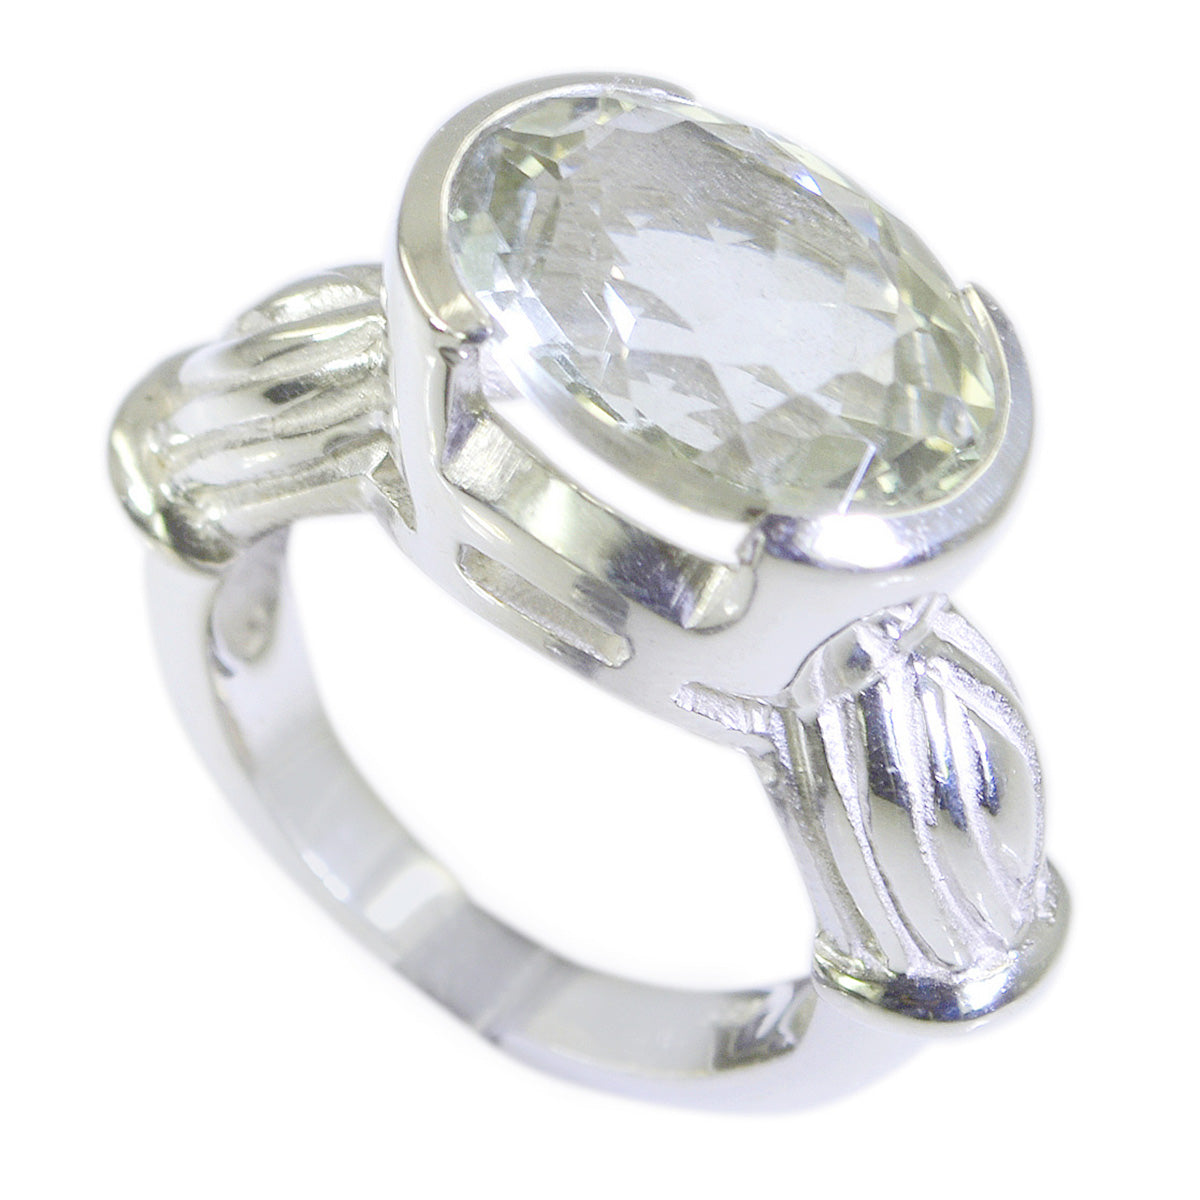 Captivating Gem Green Amethyst Sterling Silver Ring Good Selling Items